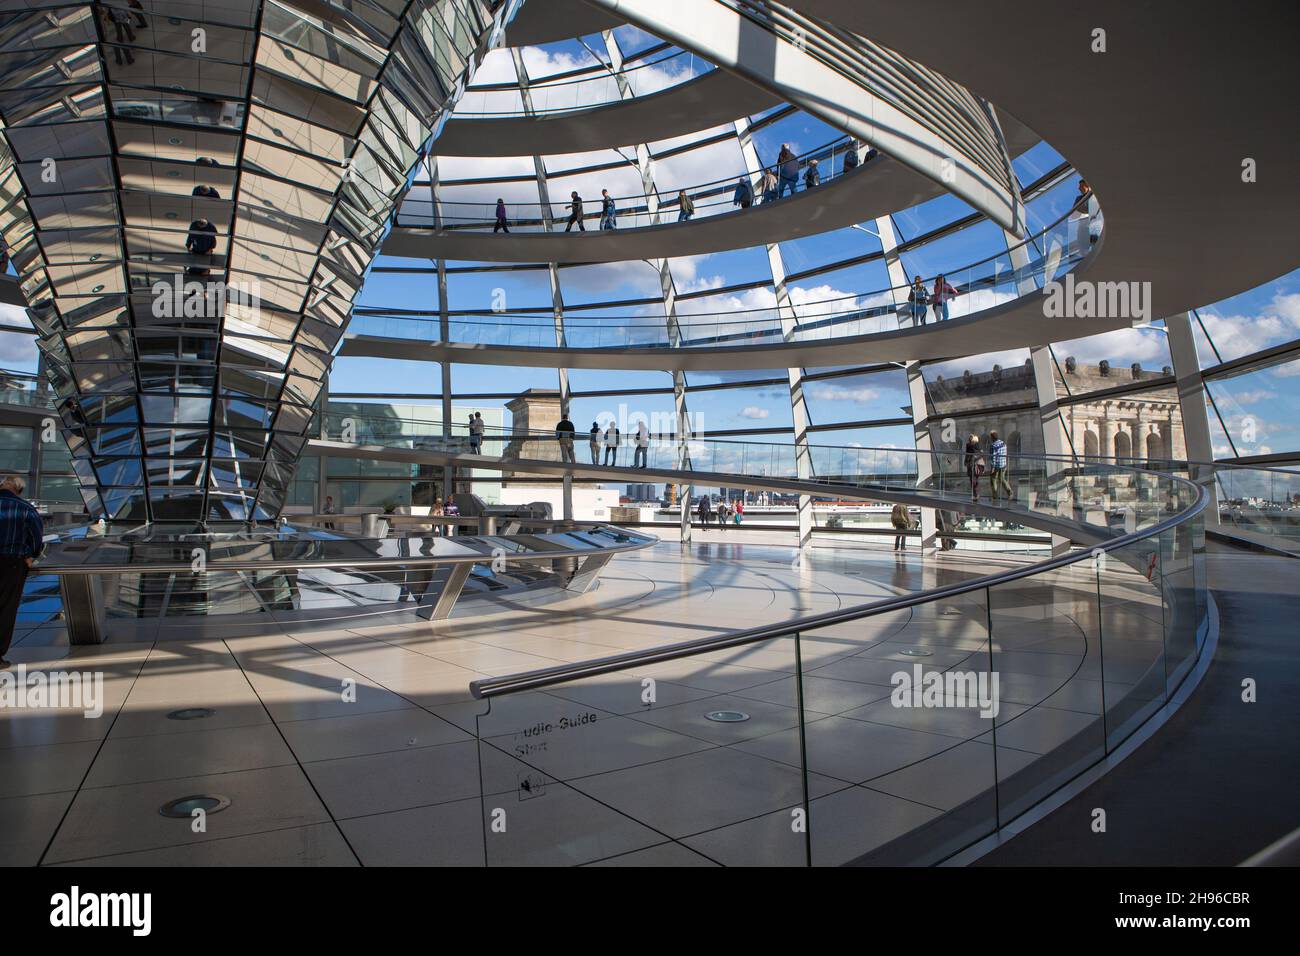 The Reichstag dome on the roof of the German Bundestag in Berlin Mitte from the inside. Modern architecture made of aluminum, glass and mirrors. Stock Photo